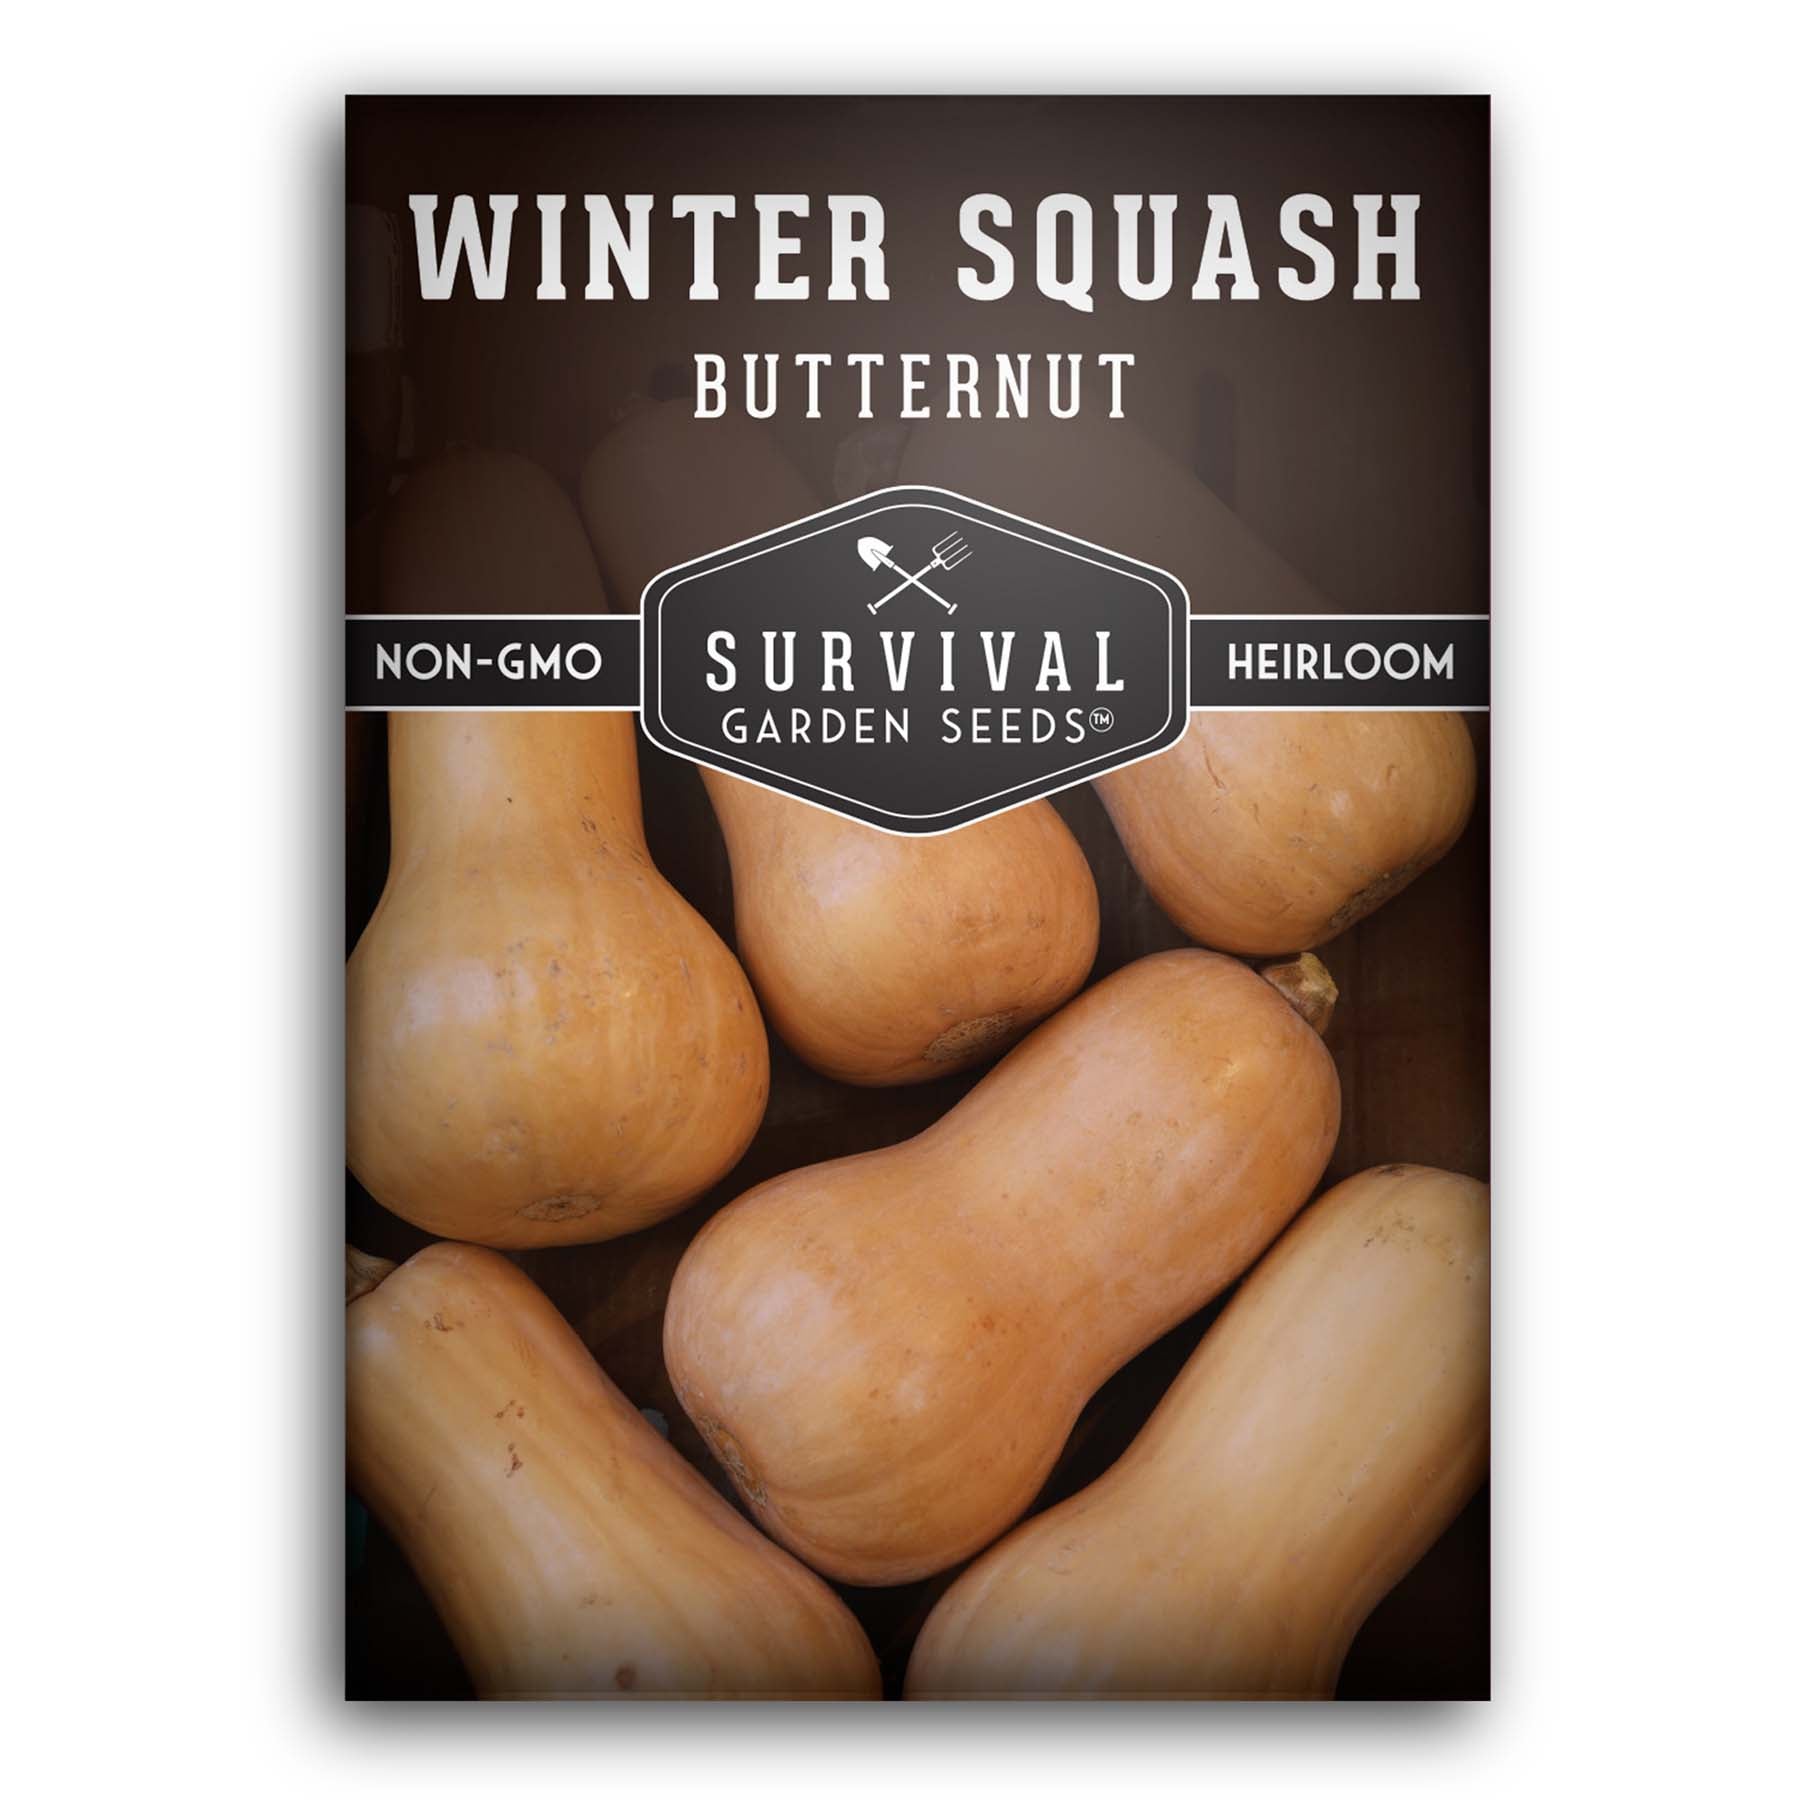 Butternut Winter Squash Seeds for planting